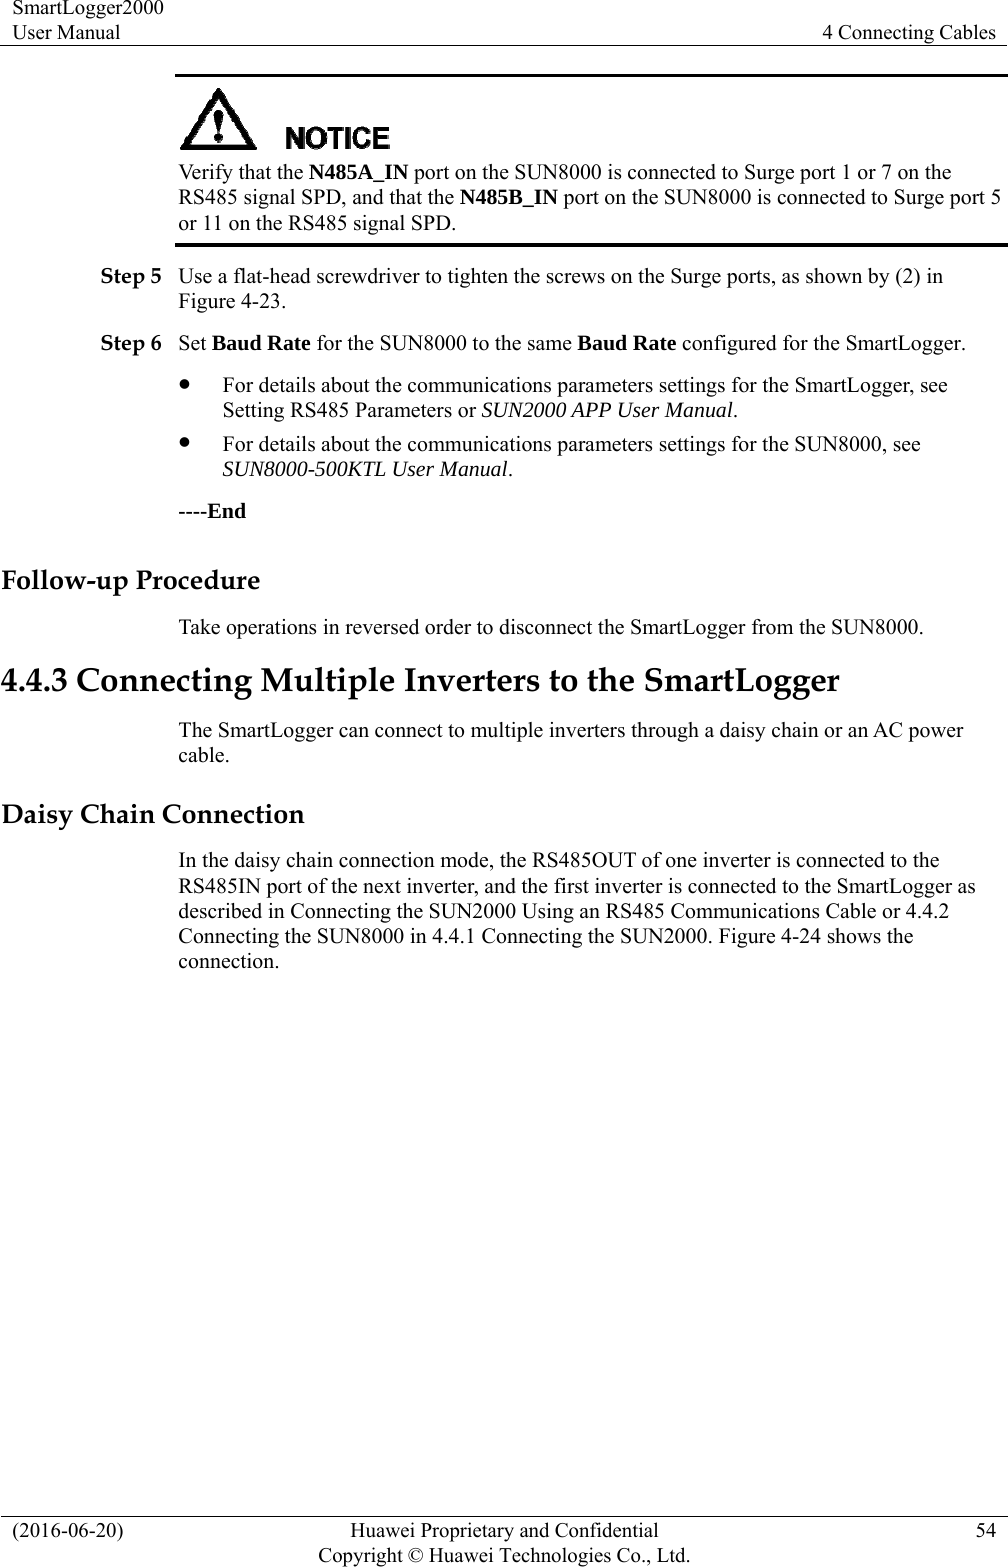 SmartLogger2000 User Manual  4 Connecting Cables (2016-06-20)  Huawei Proprietary and Confidential         Copyright © Huawei Technologies Co., Ltd.54  Verify that the N485A_IN port on the SUN8000 is connected to Surge port 1 or 7 on the RS485 signal SPD, and that the N485B_IN port on the SUN8000 is connected to Surge port 5 or 11 on the RS485 signal SPD.   Step 5 Use a flat-head screwdriver to tighten the screws on the Surge ports, as shown by (2) in Figure 4-23. Step 6 Set Baud Rate for the SUN8000 to the same Baud Rate configured for the SmartLogger.  For details about the communications parameters settings for the SmartLogger, see Setting RS485 Parameters or SUN2000 APP User Manual.   For details about the communications parameters settings for the SUN8000, see SUN8000-500KTL User Manual. ----End Follow-up Procedure Take operations in reversed order to disconnect the SmartLogger from the SUN8000. 4.4.3 Connecting Multiple Inverters to the SmartLogger The SmartLogger can connect to multiple inverters through a daisy chain or an AC power cable.  Daisy Chain Connection In the daisy chain connection mode, the RS485OUT of one inverter is connected to the RS485IN port of the next inverter, and the first inverter is connected to the SmartLogger as described in Connecting the SUN2000 Using an RS485 Communications Cable or 4.4.2 Connecting the SUN8000 in 4.4.1 Connecting the SUN2000. Figure 4-24 shows the connection.  